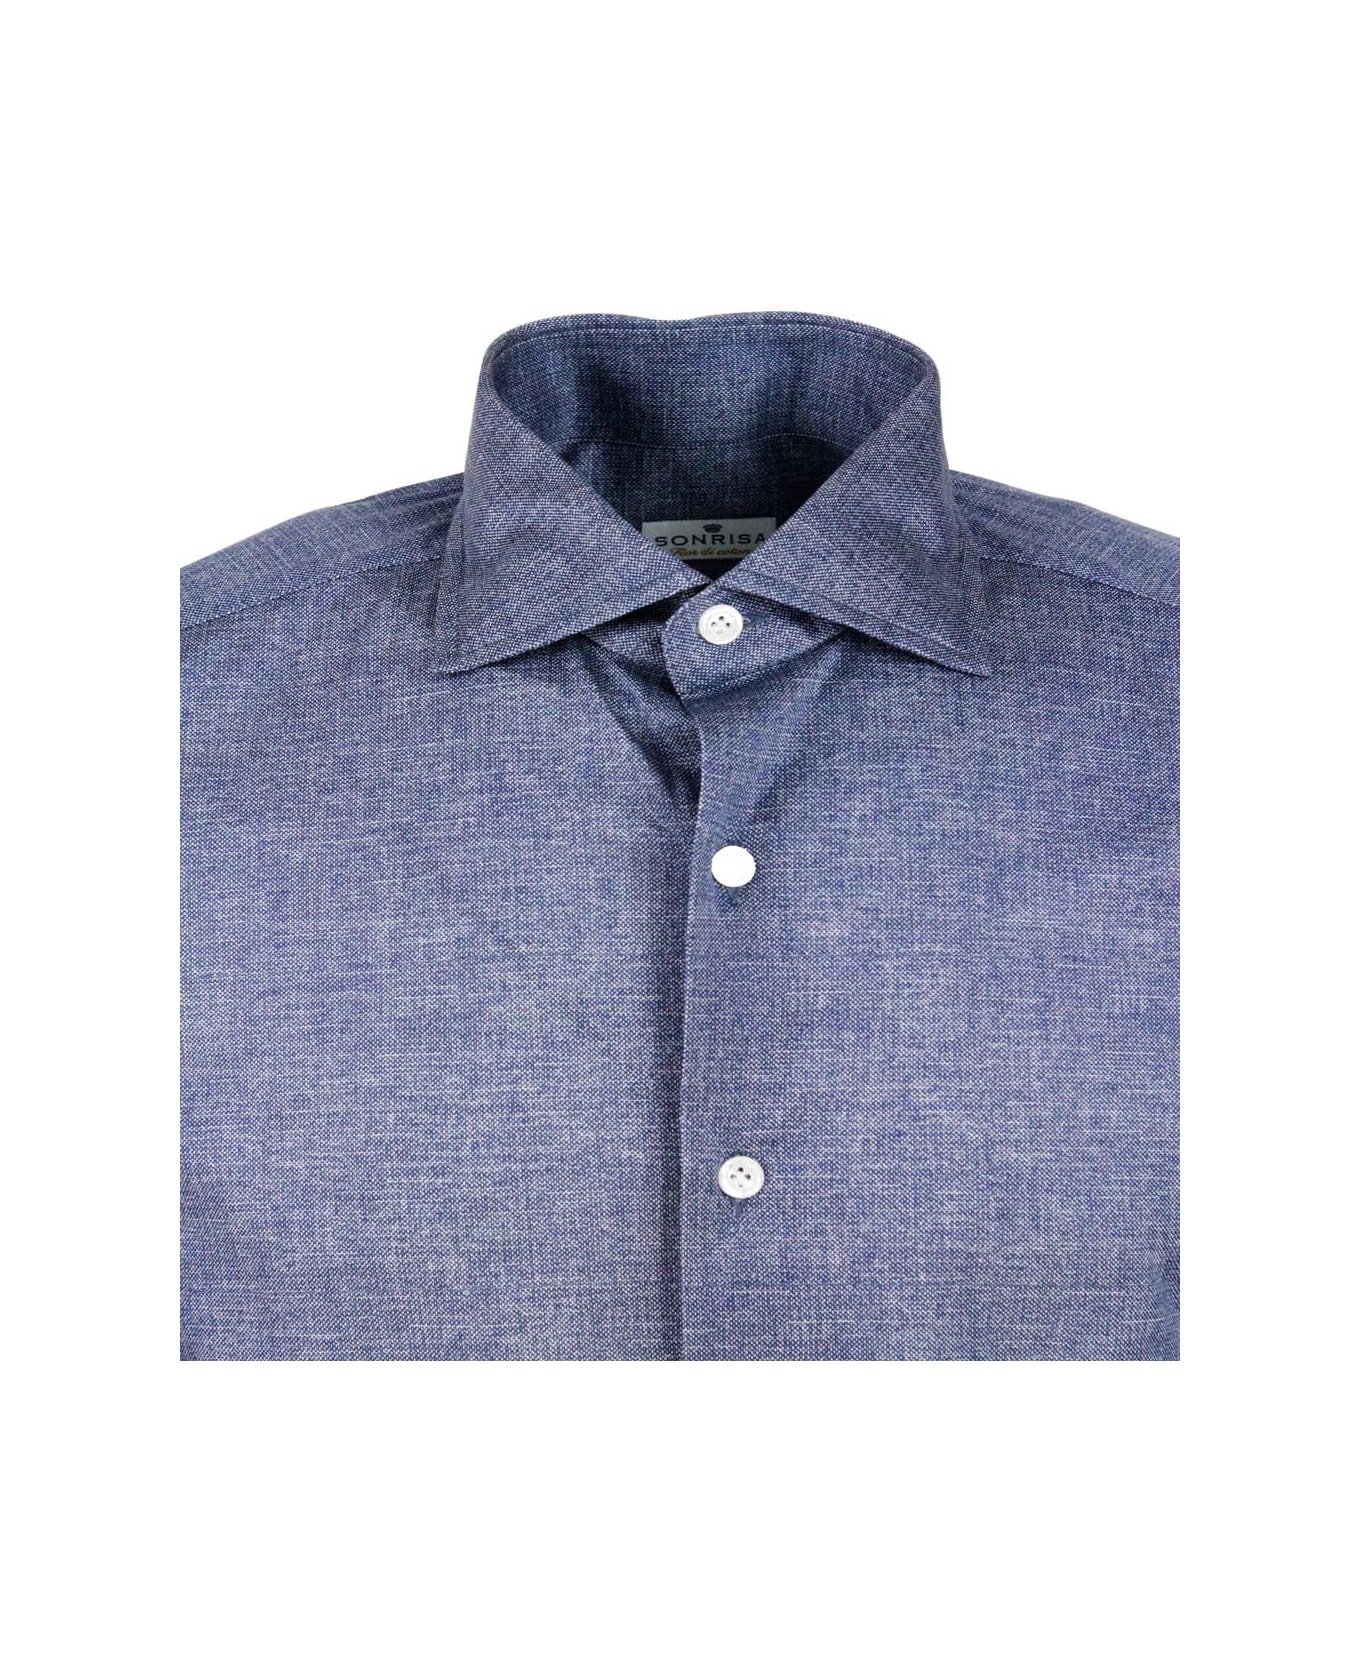 Sonrisa Luxury Shirt In Soft, Precious And Very Fine Stretch Cotton Flower With French Collar In Two-tone Melange Print - Blu navy